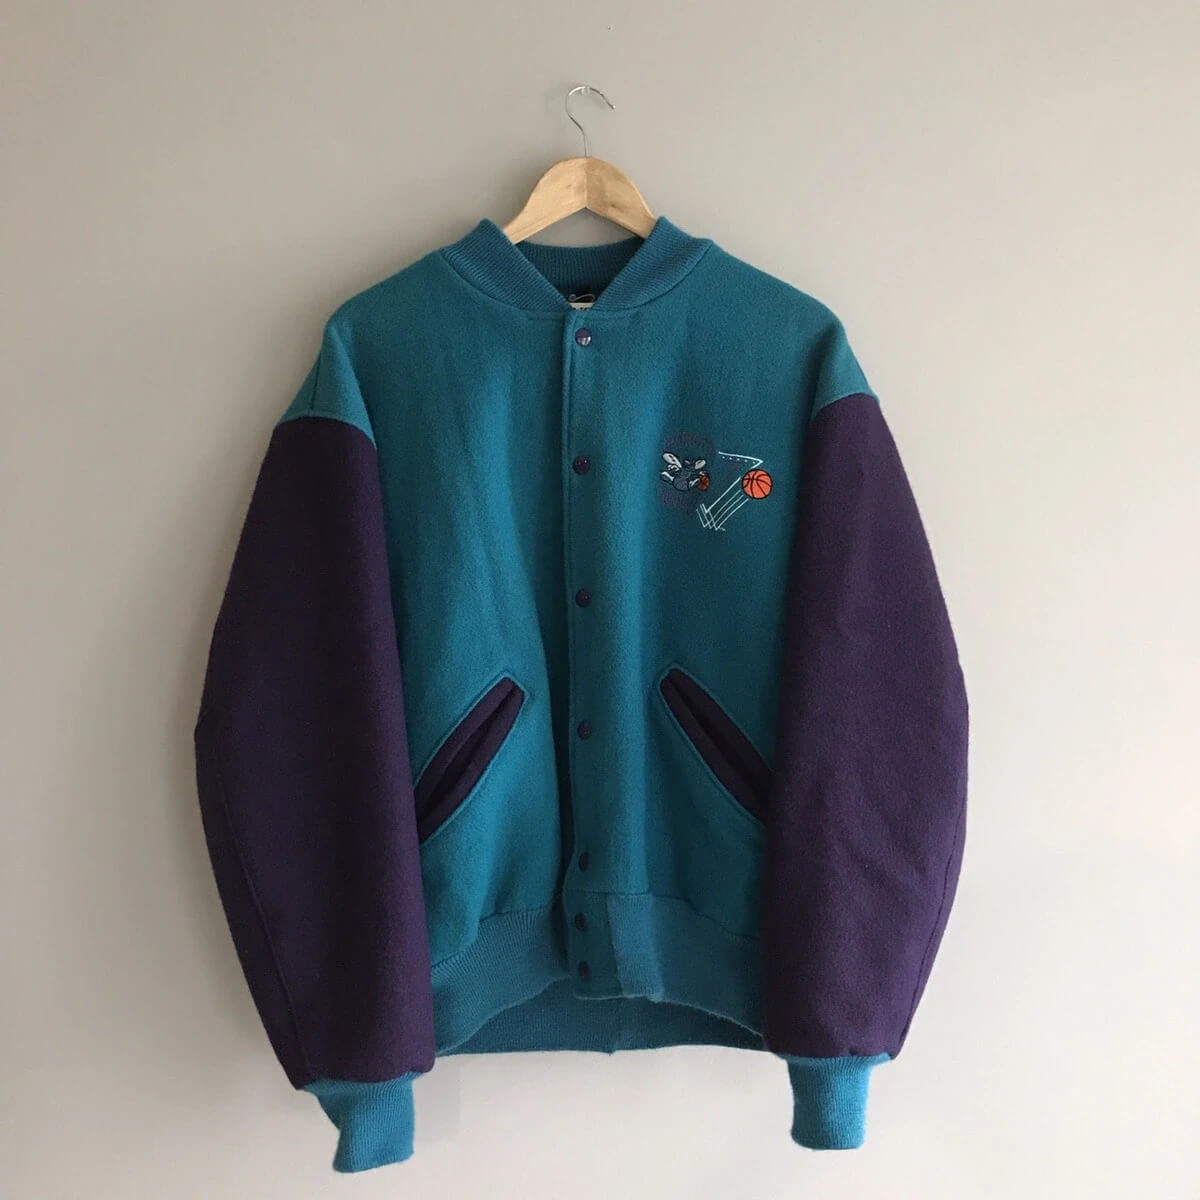 Buy 90s Hornets Jacket Online In India -  India